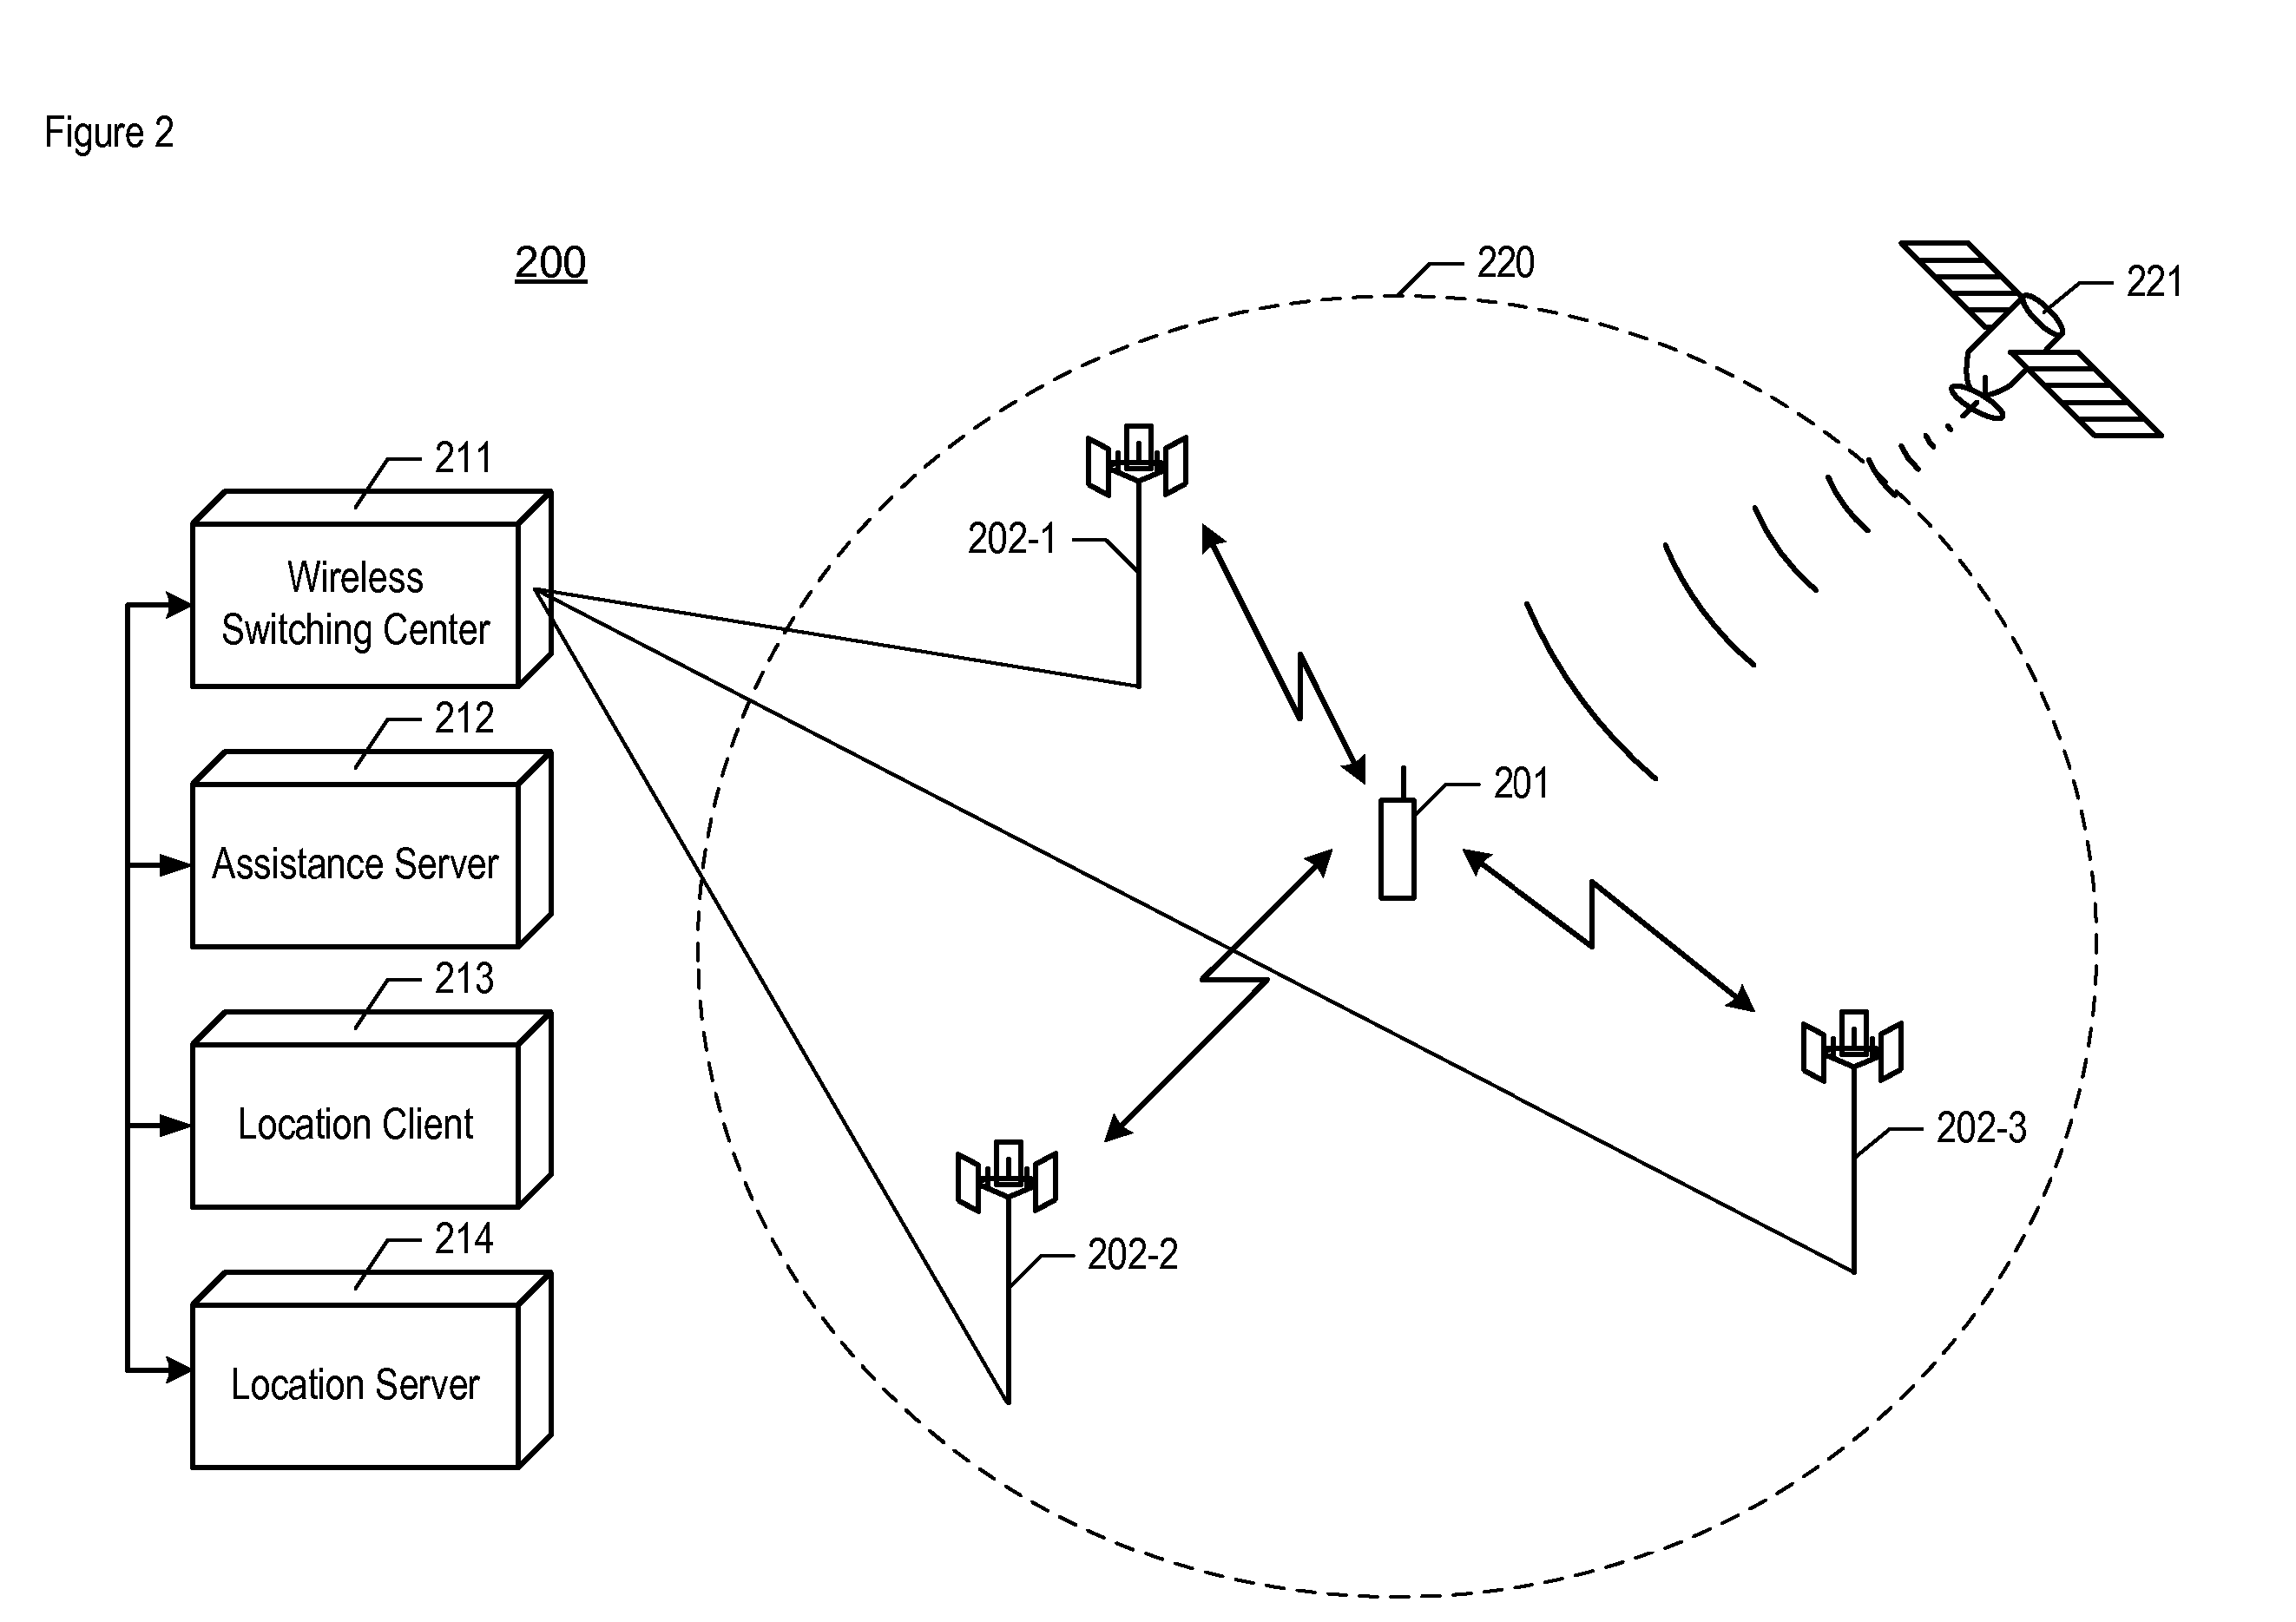 Estimating the Location of a Wireless Terminal Based on Non-Uniform Probabilities of Movement